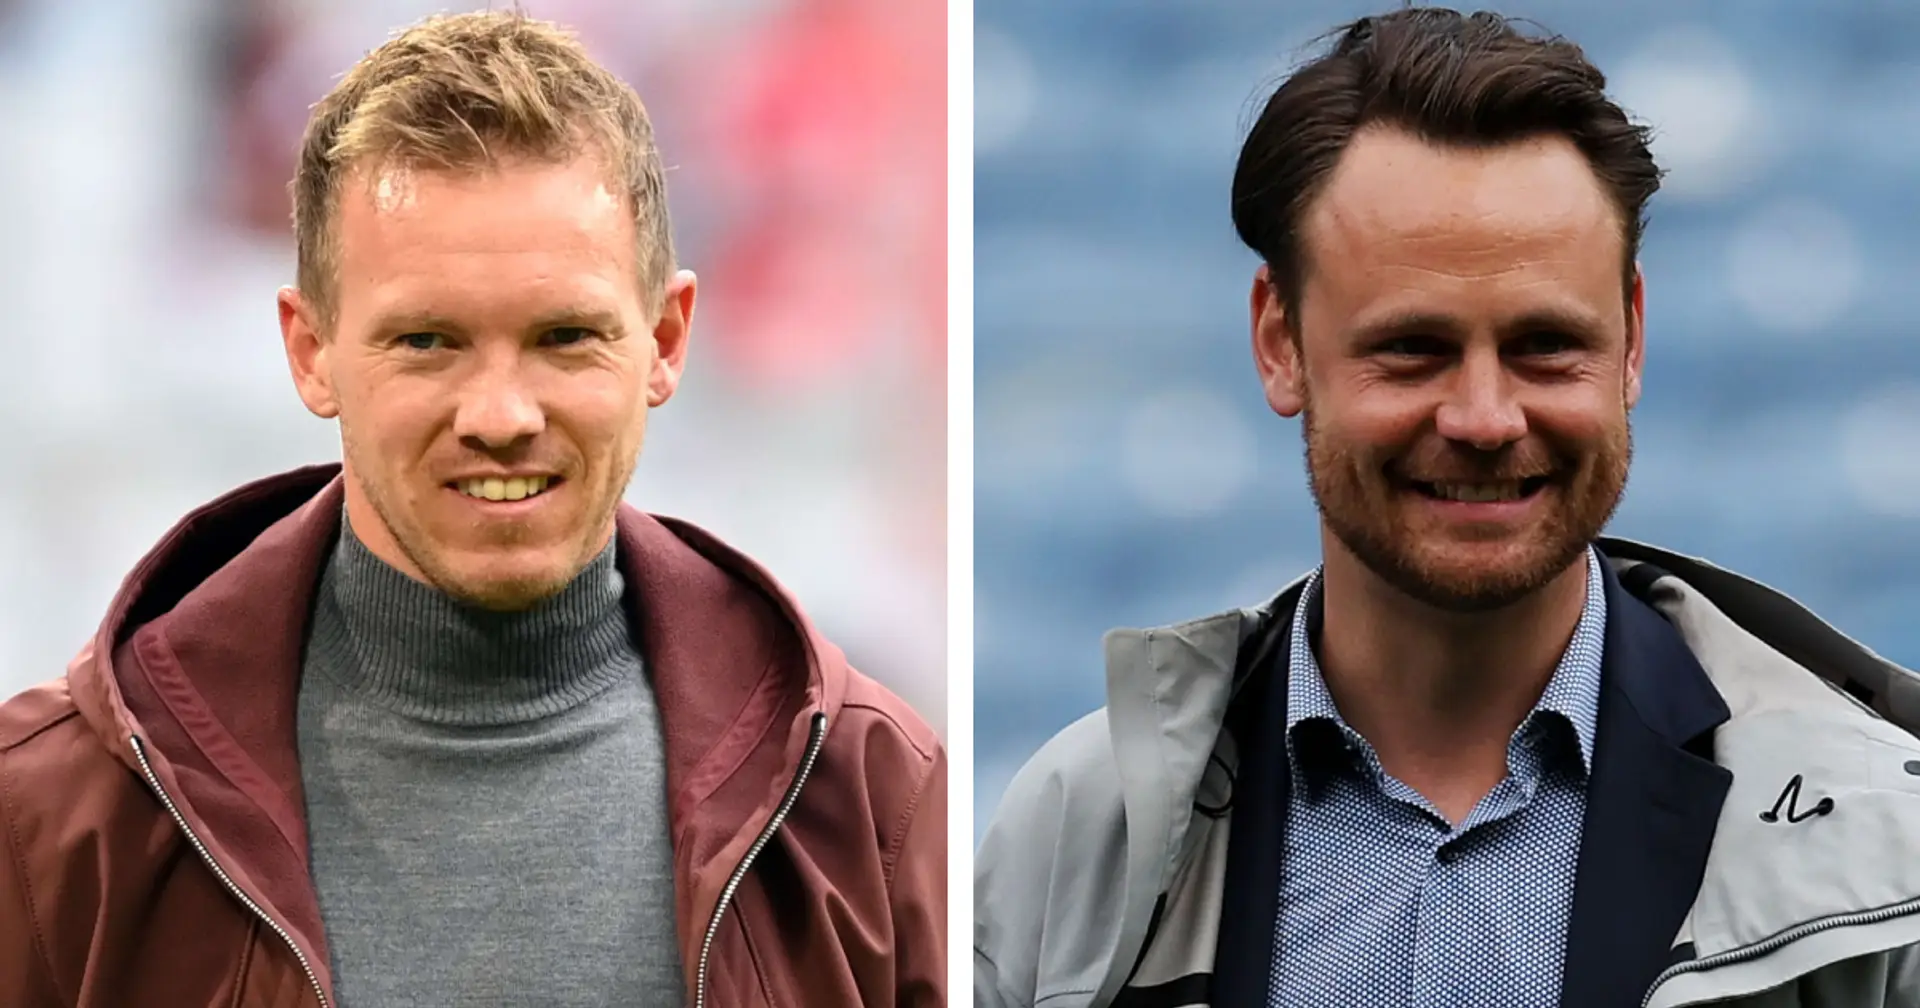 Top source names 2 factors in Chelsea's interest in Nagelsmann - one has to do with Timo Werner